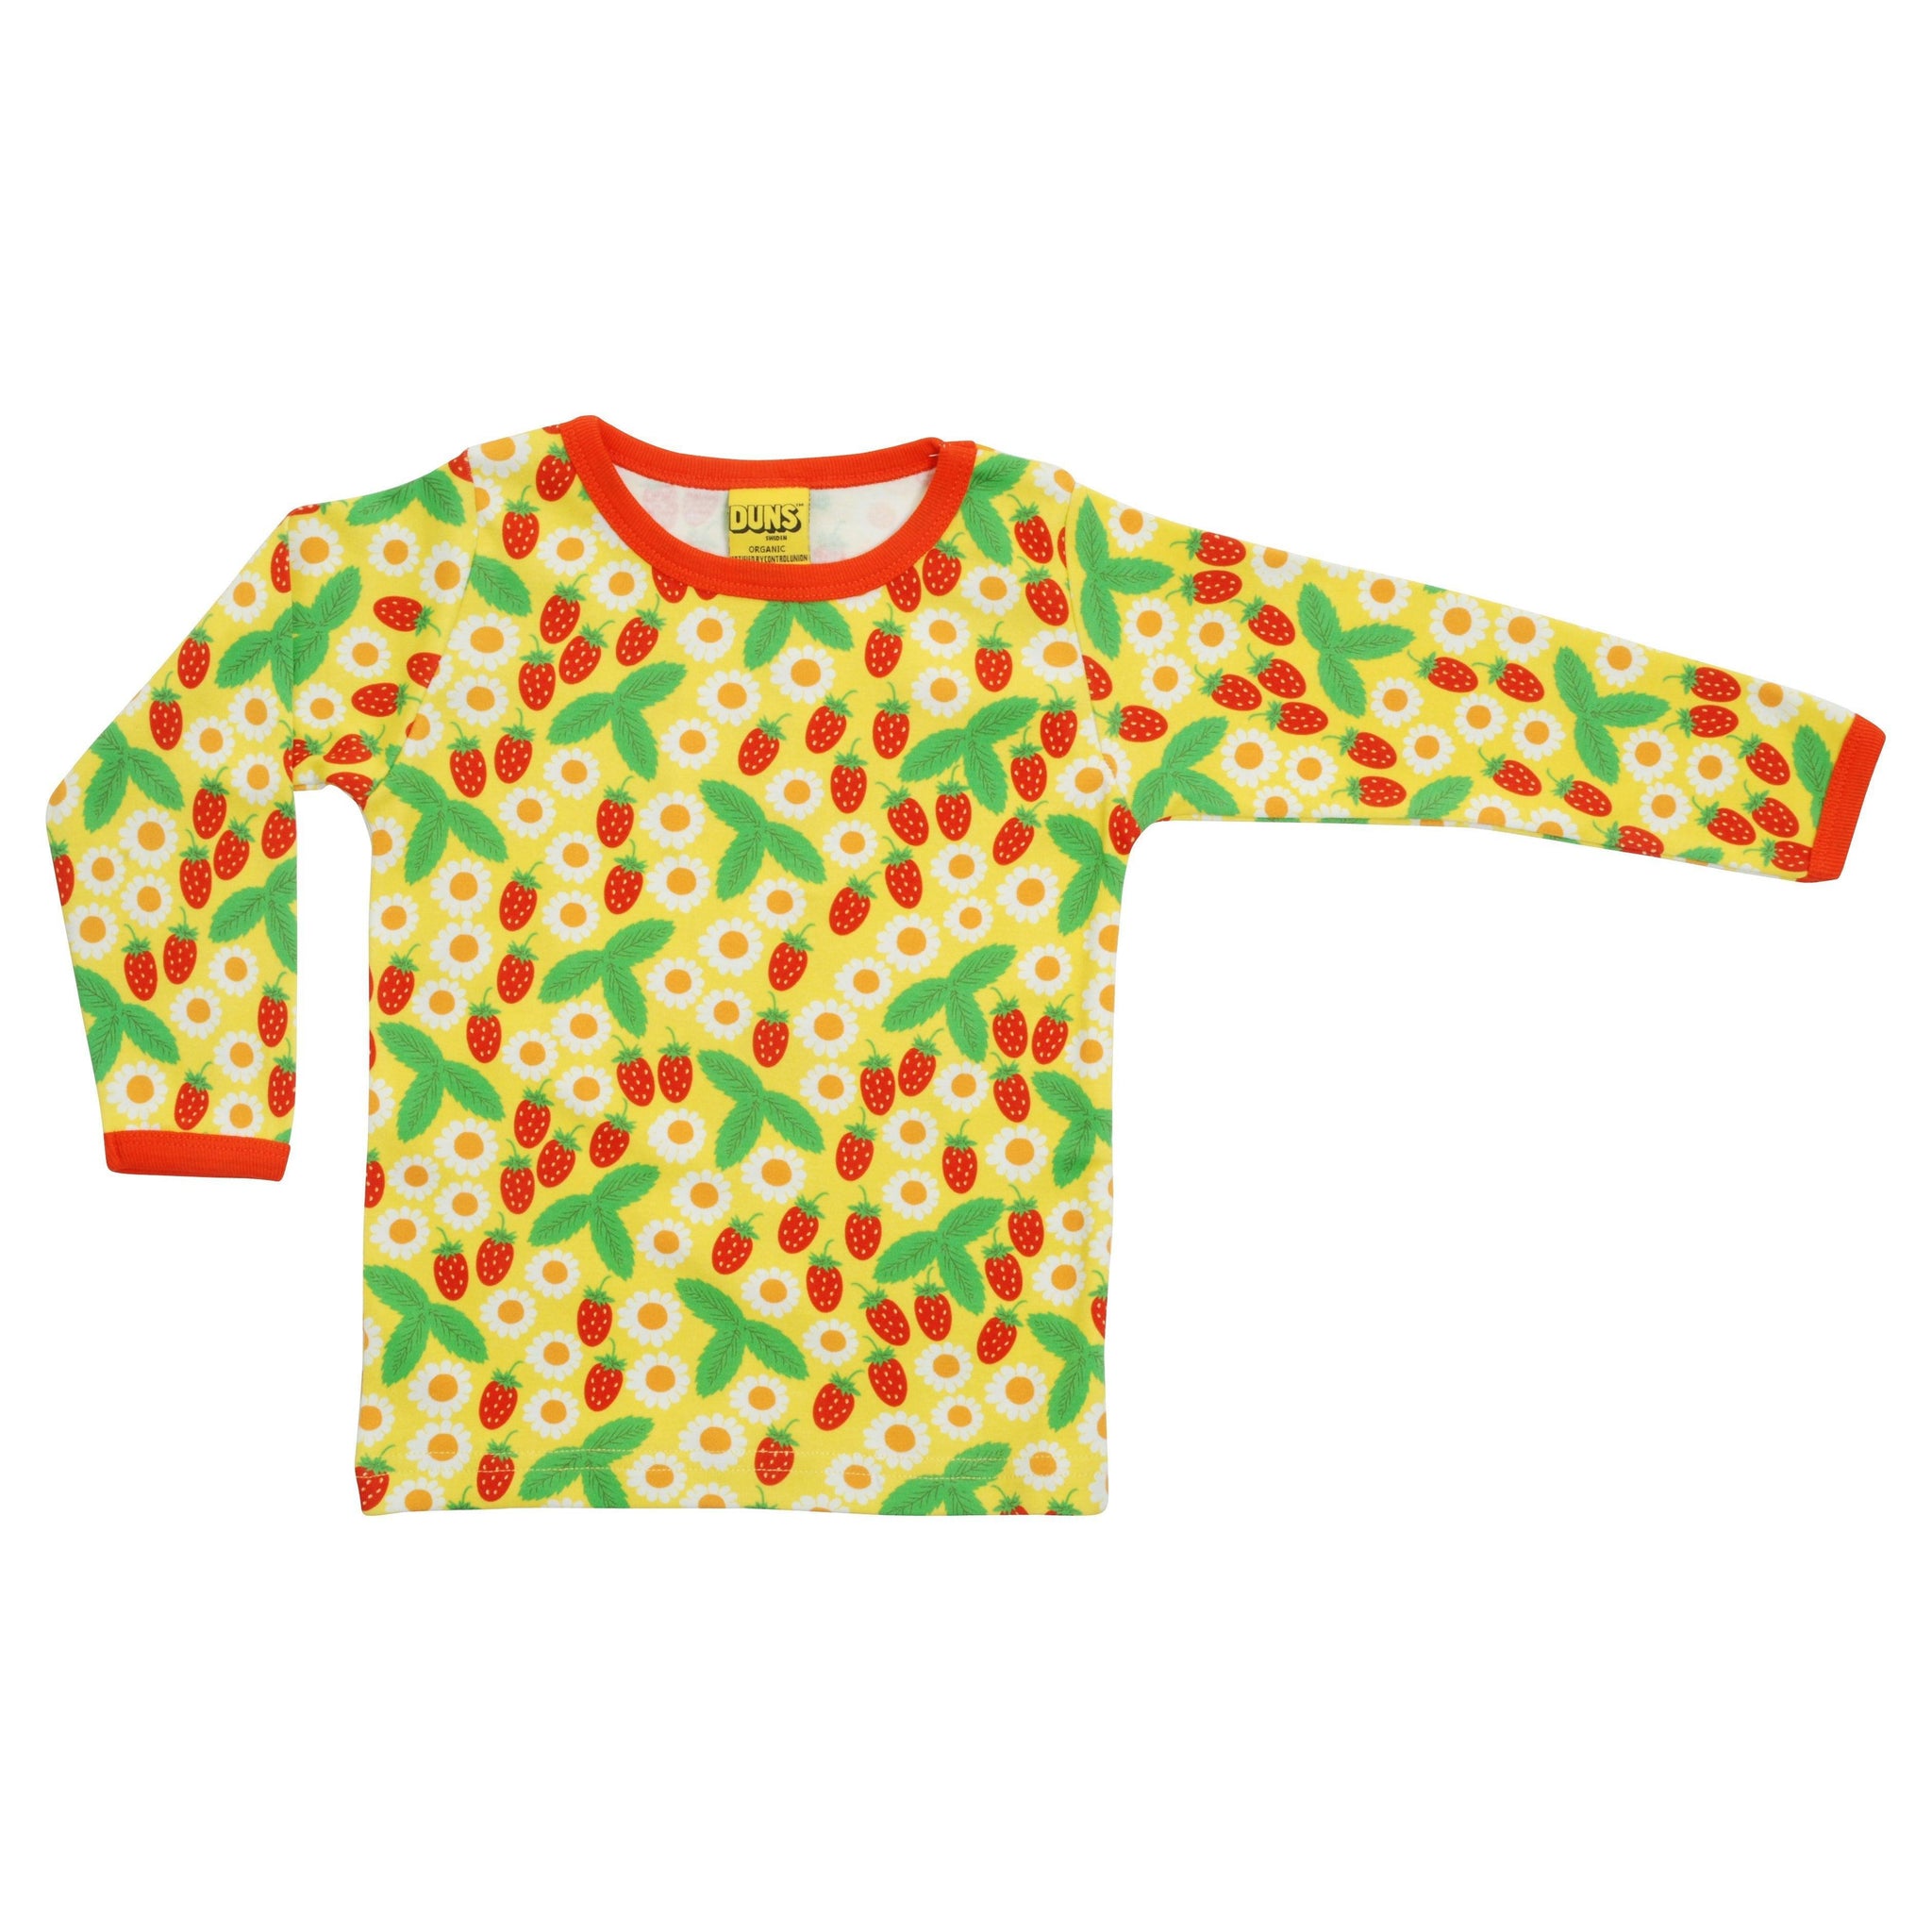 DUNS Sweden - Daisies and Strawberries Long Sleeved Top (Buttercup)